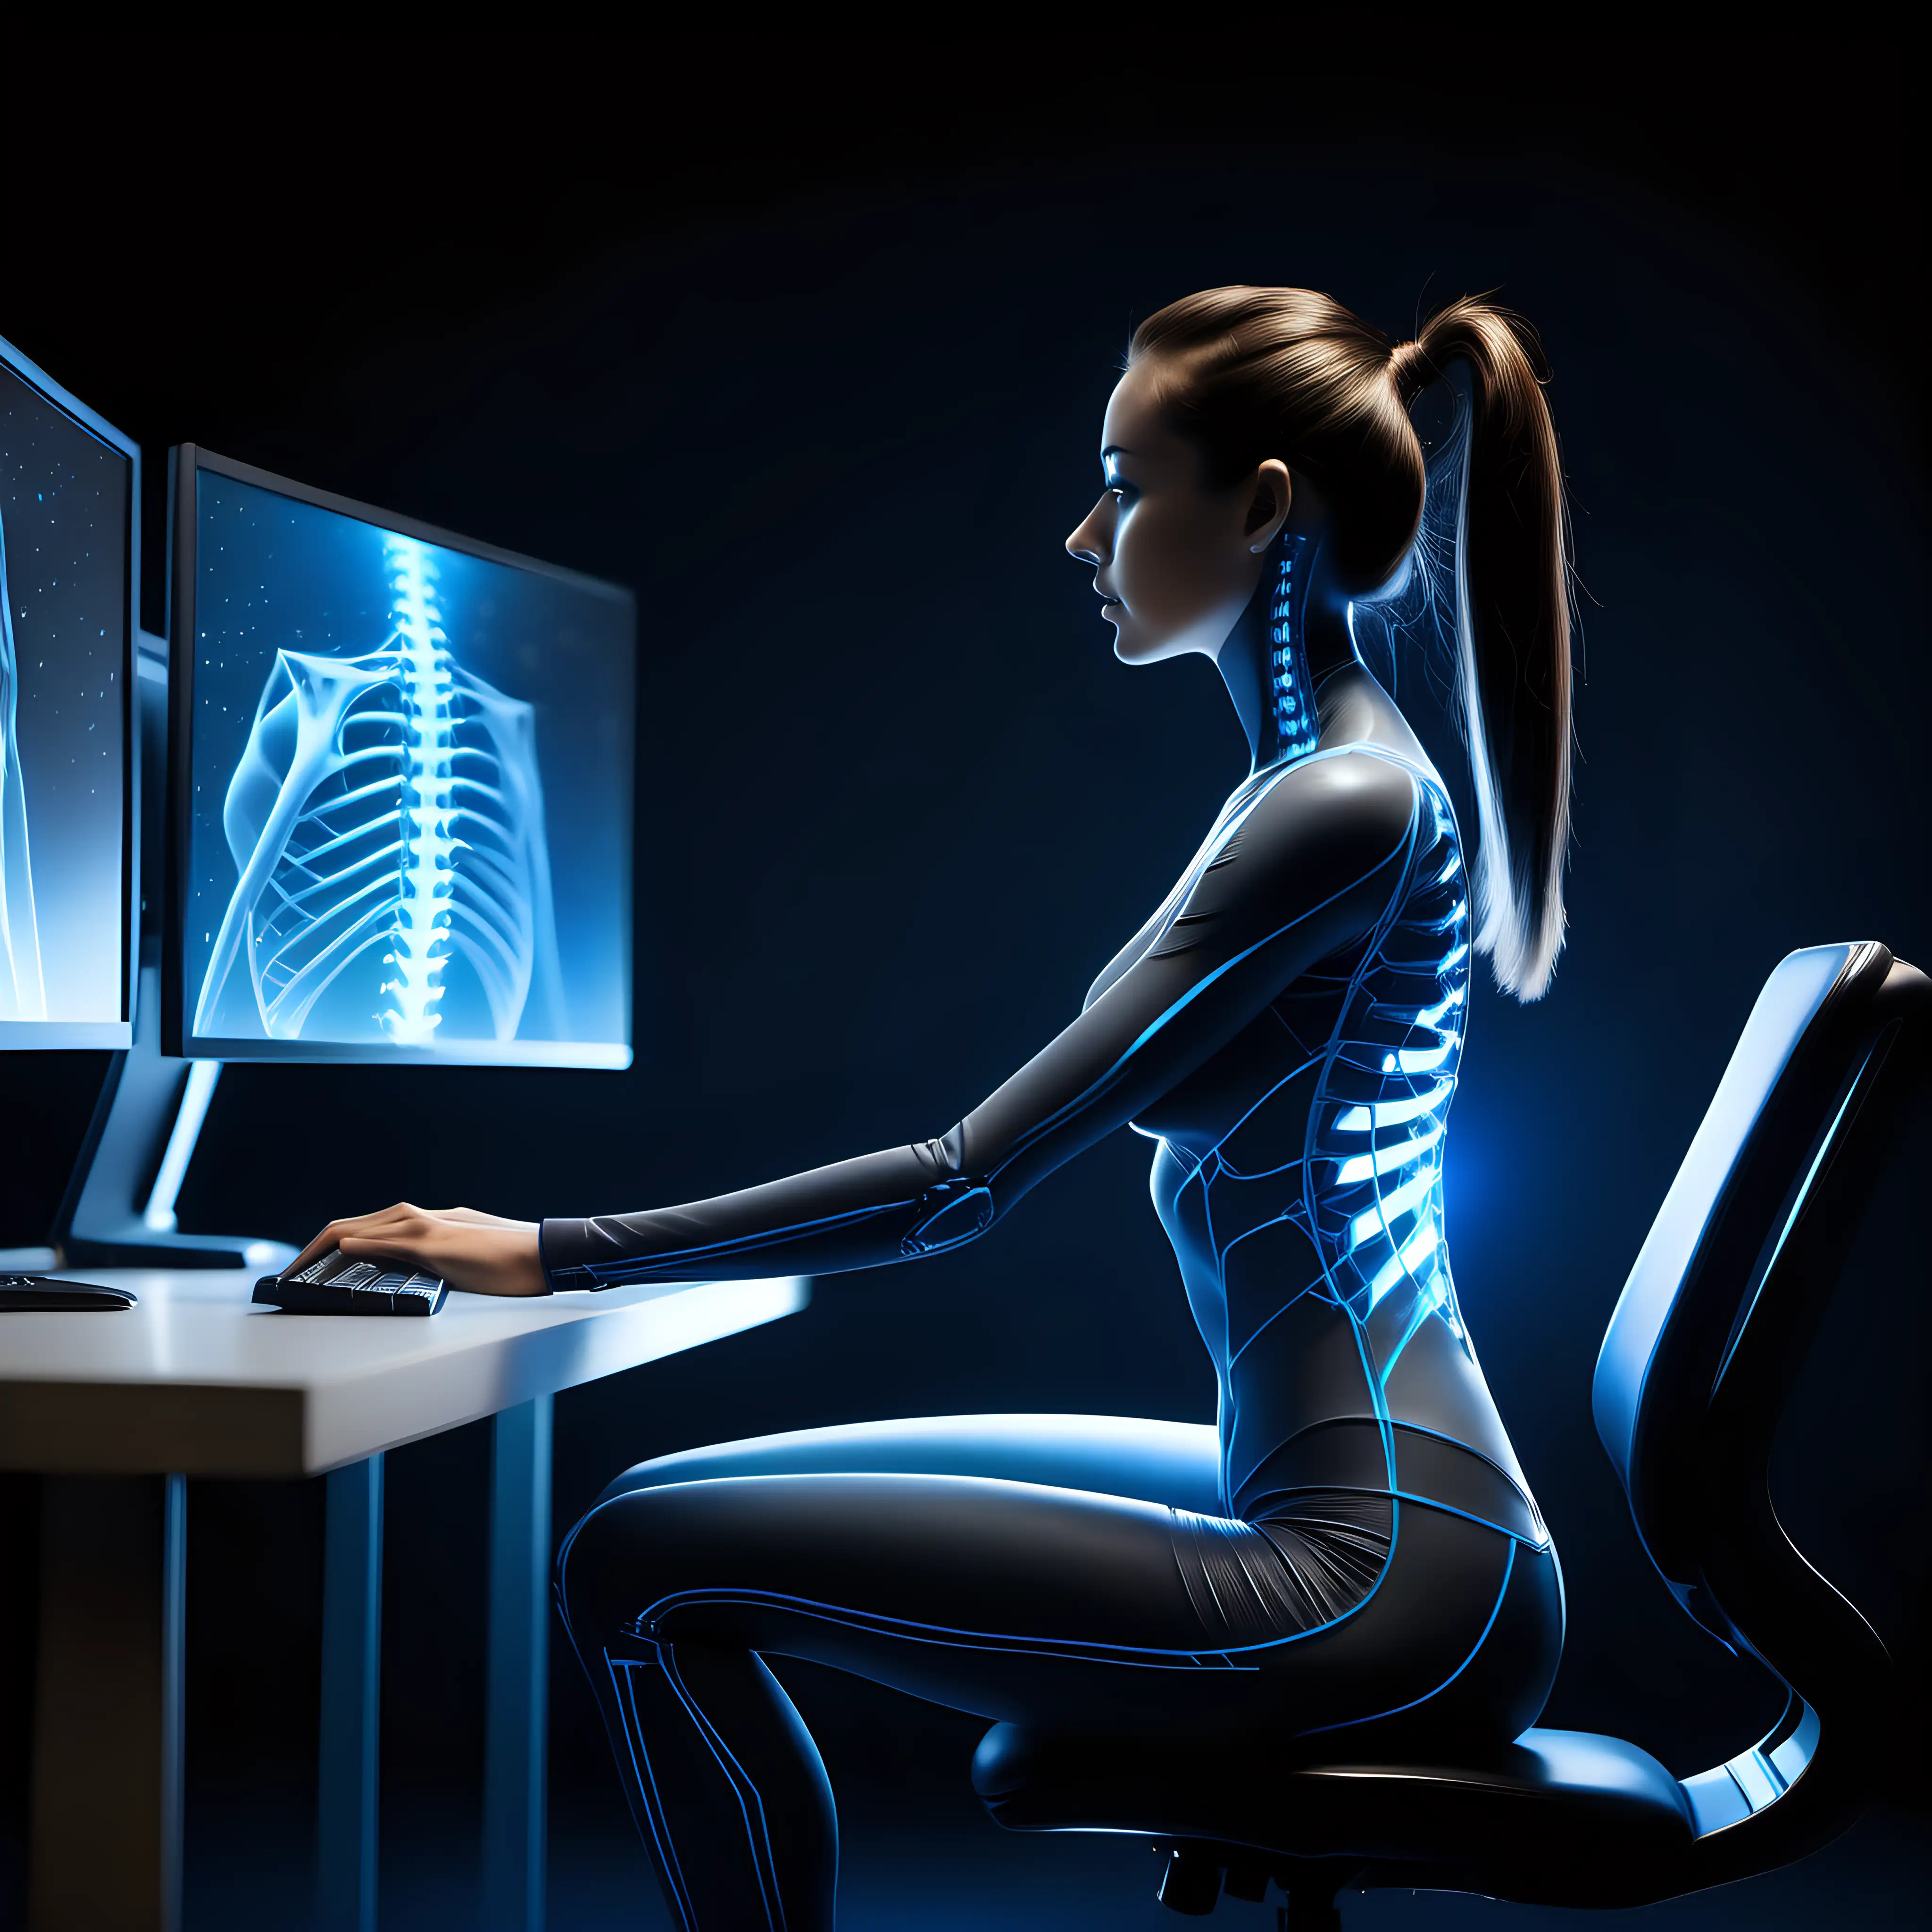 Professional Woman Working at Computer with Blue Rays and Dark Space Background